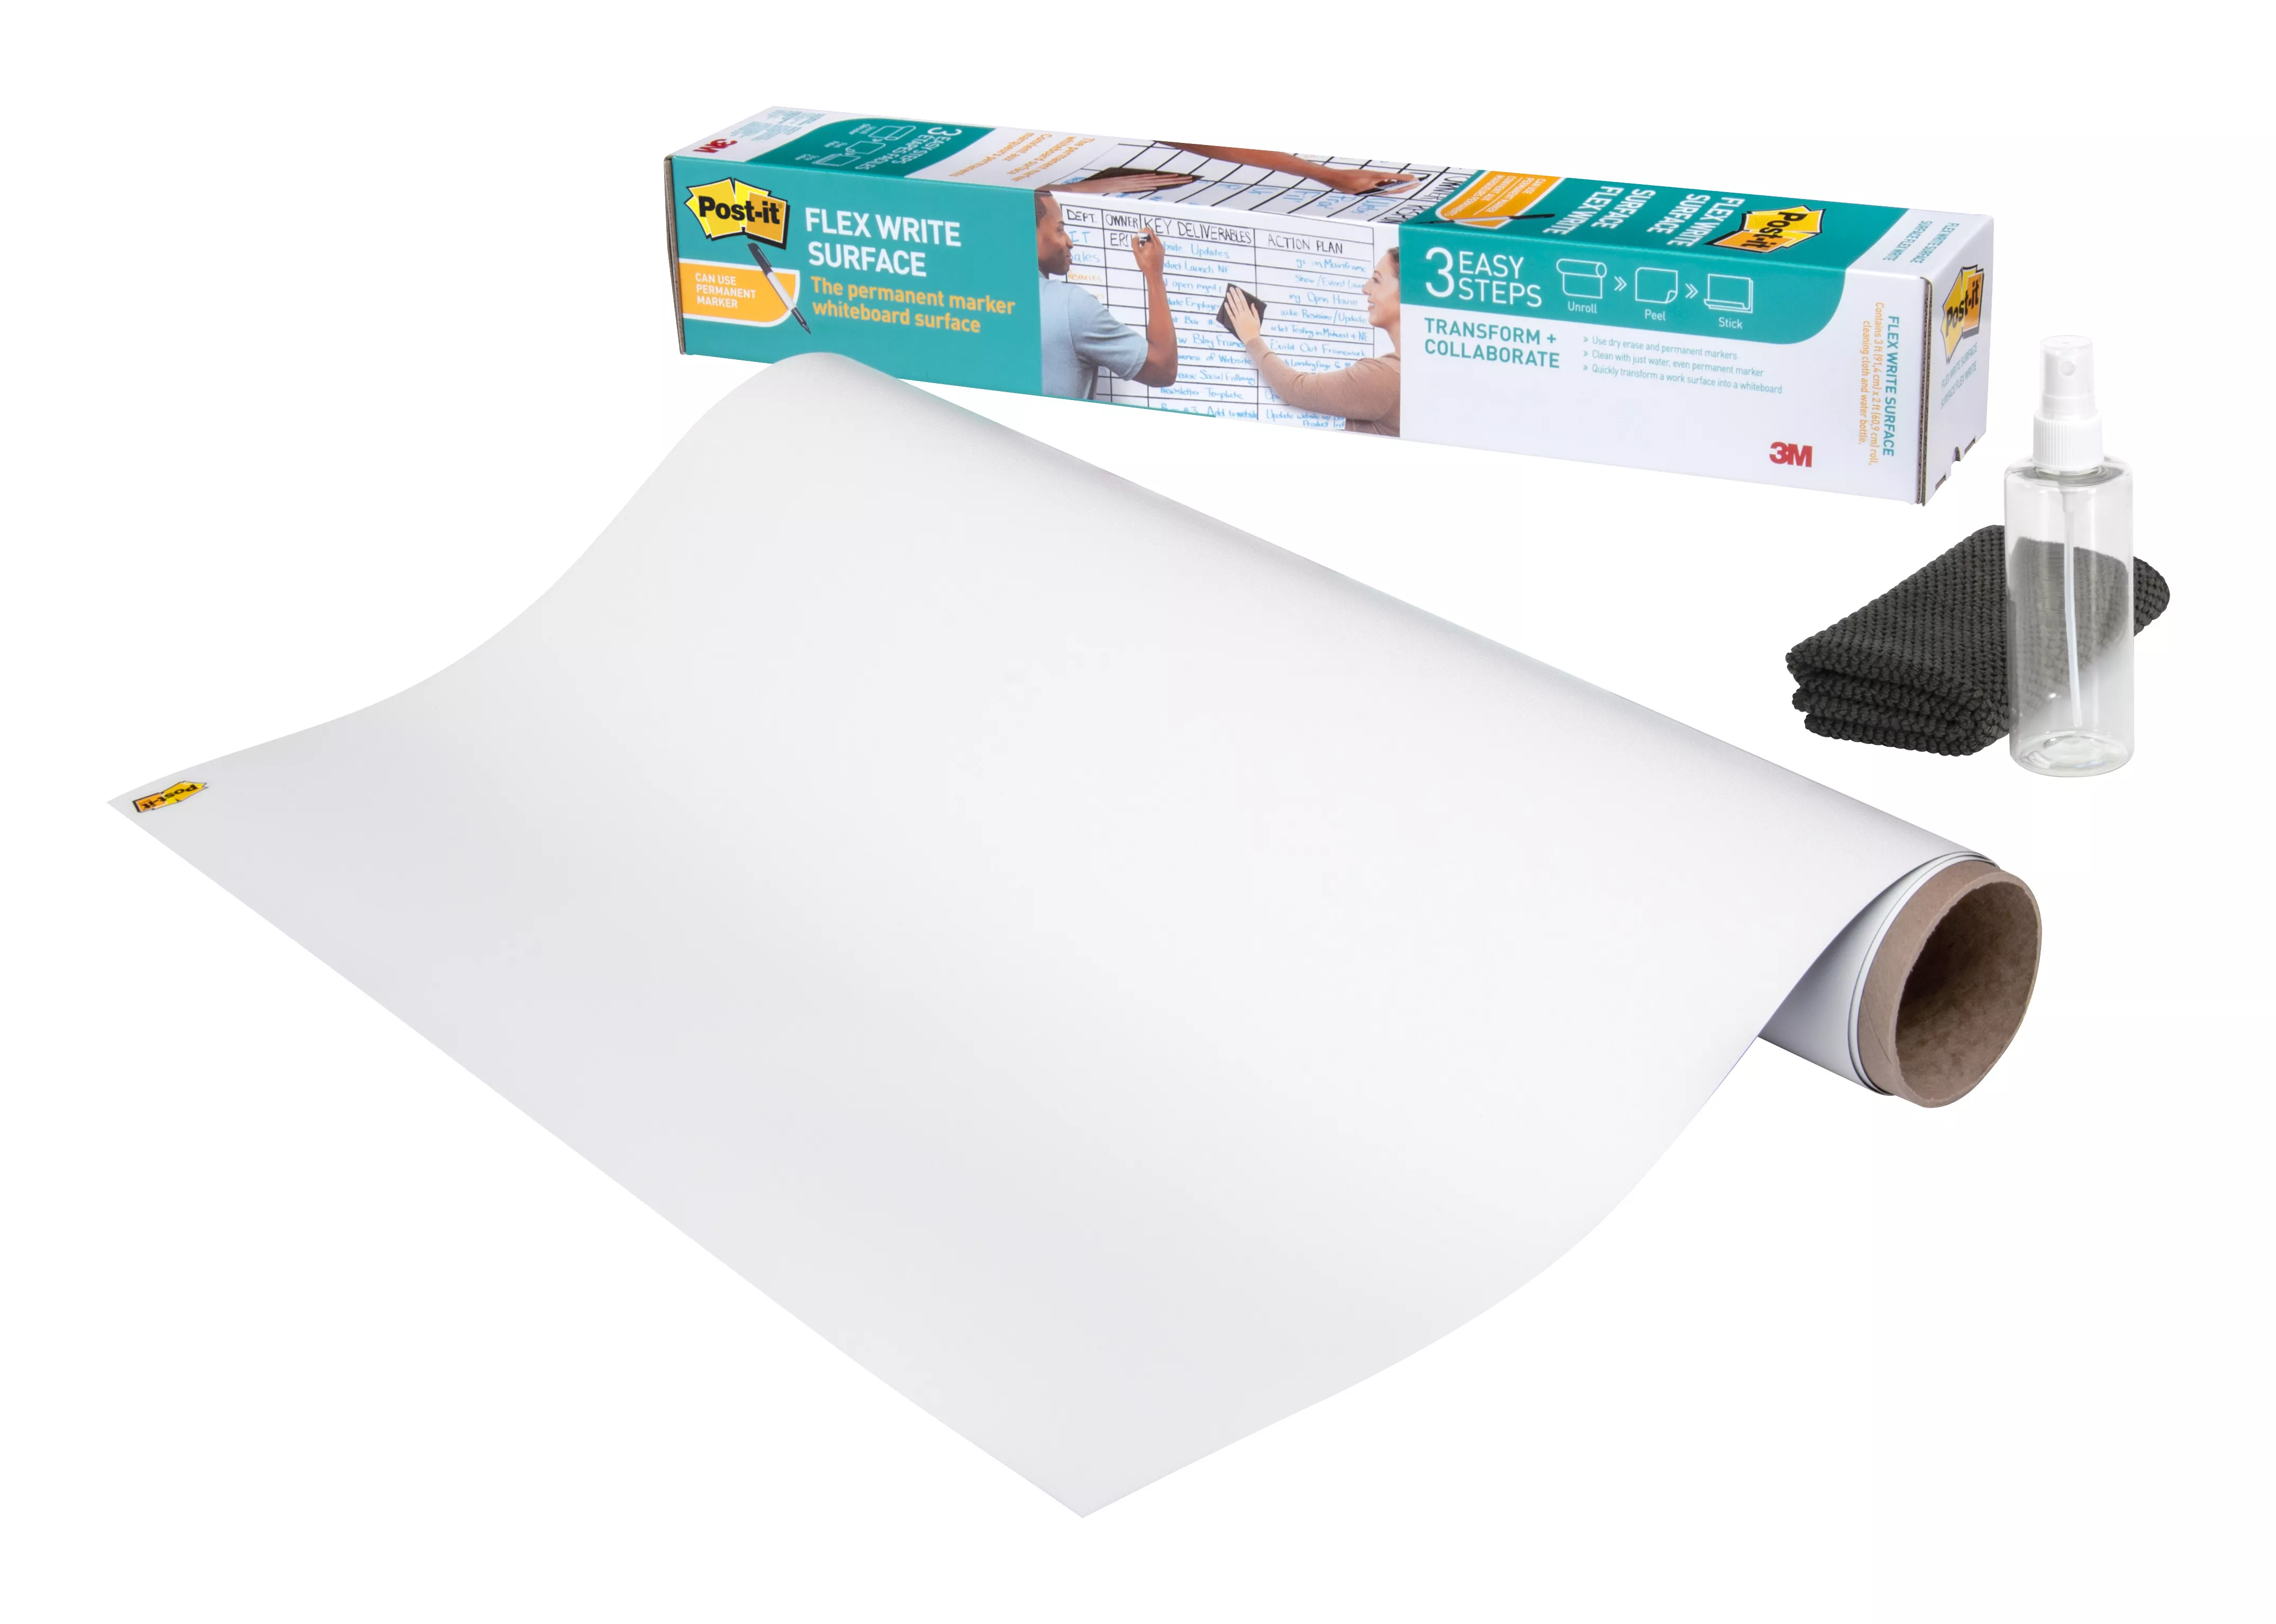 Post-it® Flex Write Surface, The Permanent Marker Whiteboard Surface, 3
ft. x 2 ft.